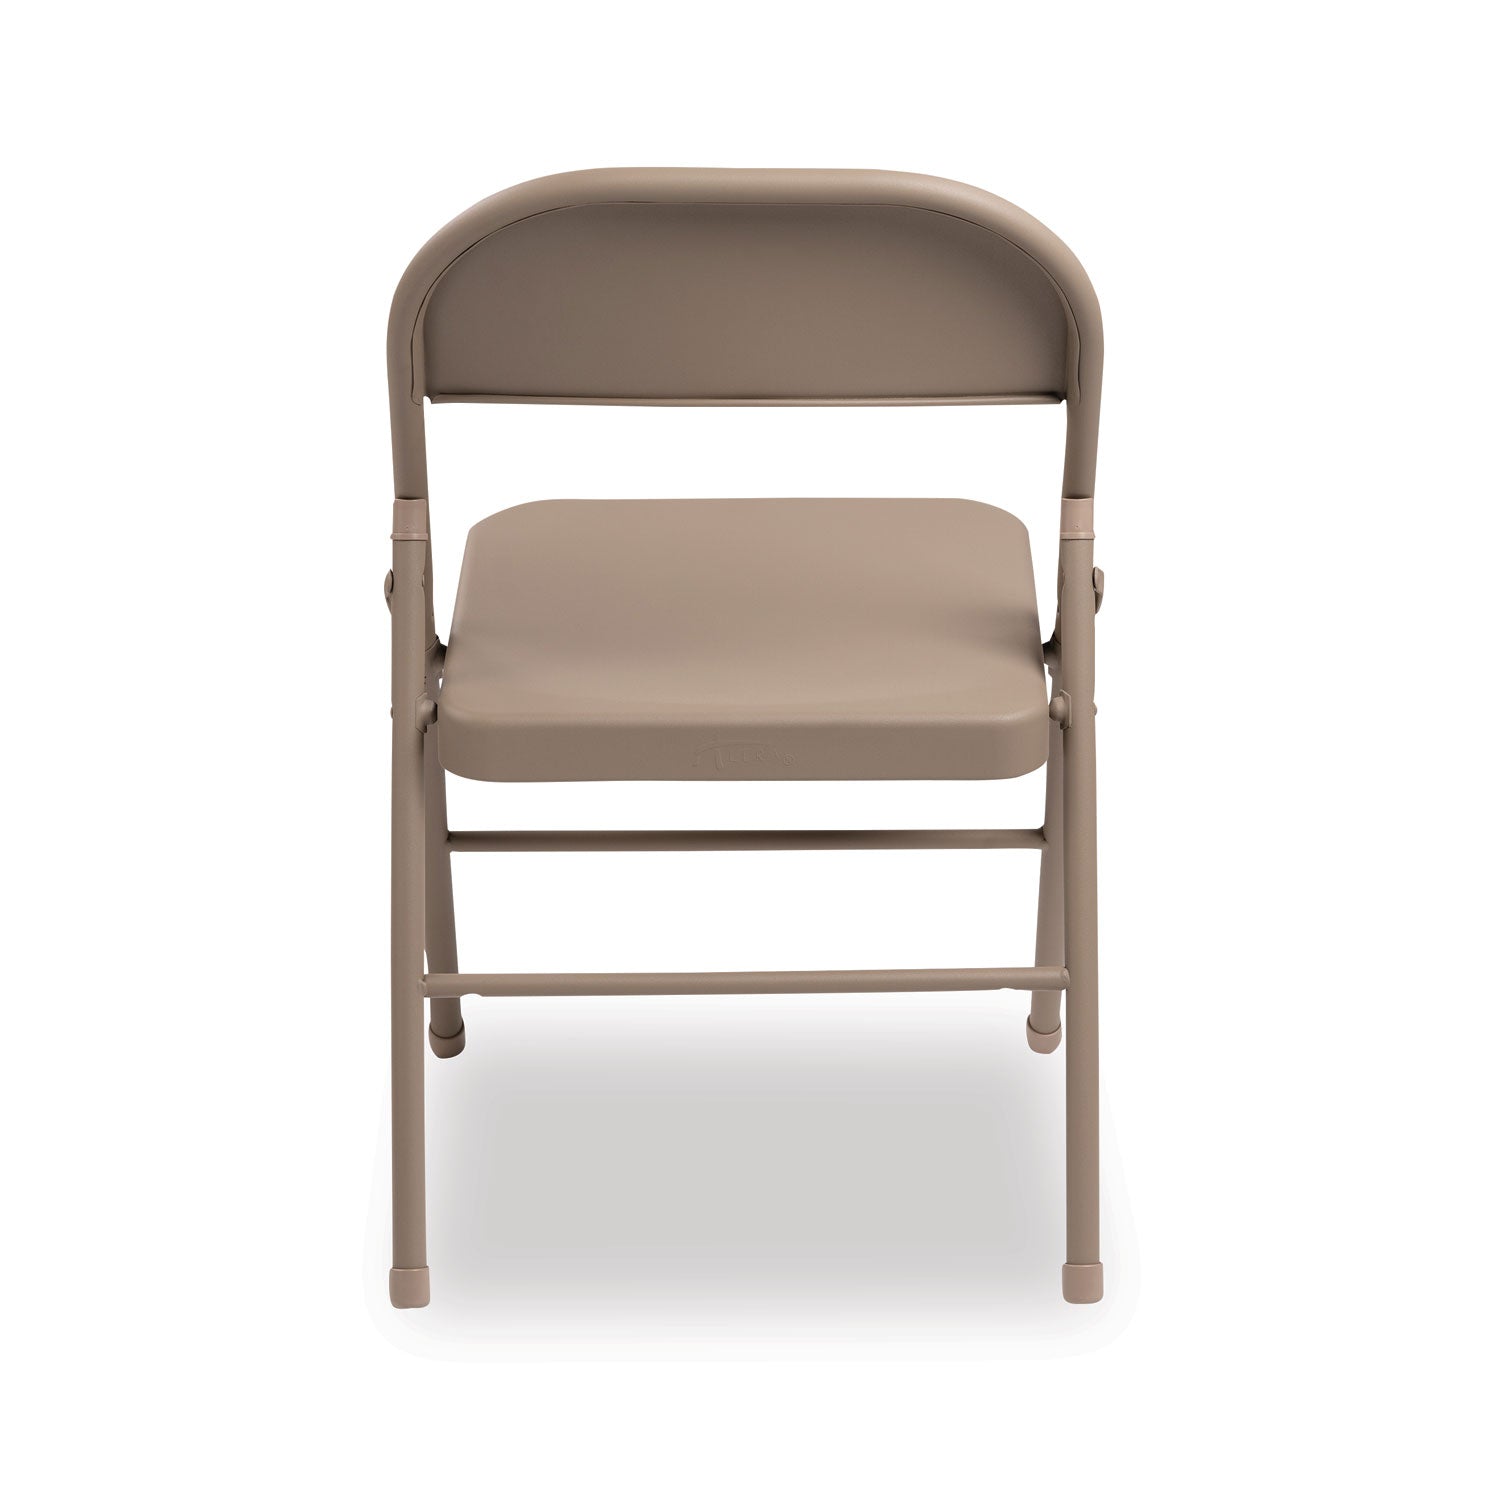 all-steel-folding-chair-supports-up-to-300-lb-165-seat-height-tan-seat-tan-back-tan-base-4-carton_alefcmt4t - 6